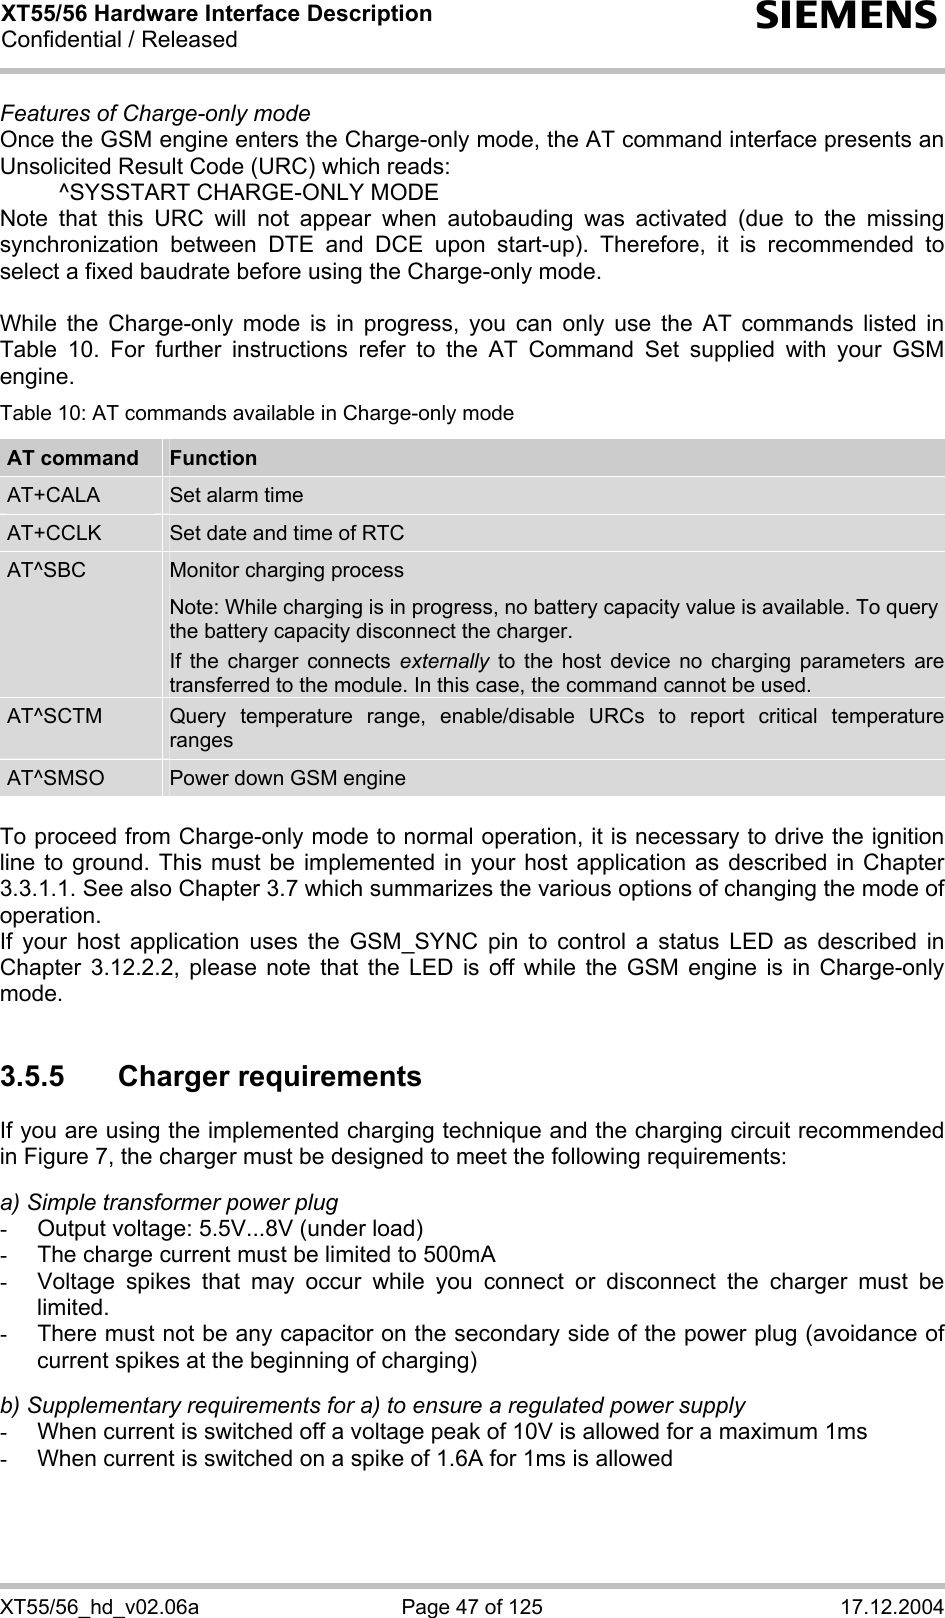 XT55/56 Hardware Interface Description Confidential / Released s XT55/56_hd_v02.06a  Page 47 of 125  17.12.2004 Features of Charge-only mode Once the GSM engine enters the Charge-only mode, the AT command interface presents an Unsolicited Result Code (URC) which reads:   ^SYSSTART CHARGE-ONLY MODE Note that this URC will not appear when autobauding was activated (due to the missing synchronization between DTE and DCE upon start-up). Therefore, it is recommended to select a fixed baudrate before using the Charge-only mode.  While the Charge-only mode is in progress, you can only use the AT commands listed in Table 10. For further instructions refer to the AT Command Set supplied with your GSM engine. Table 10: AT commands available in Charge-only mode AT command  Function AT+CALA  Set alarm time AT+CCLK  Set date and time of RTC AT^SBC  Monitor charging process Note: While charging is in progress, no battery capacity value is available. To query the battery capacity disconnect the charger.  If the charger connects externally to the host device no charging parameters are transferred to the module. In this case, the command cannot be used. AT^SCTM  Query temperature range, enable/disable URCs to report critical temperature ranges AT^SMSO  Power down GSM engine  To proceed from Charge-only mode to normal operation, it is necessary to drive the ignition line to ground. This must be implemented in your host application as described in Chapter 3.3.1.1. See also Chapter 3.7 which summarizes the various options of changing the mode of operation. If your host application uses the GSM_SYNC pin to control a status LED as described in Chapter 3.12.2.2, please note that the LED is off while the GSM engine is in Charge-only mode.  3.5.5 Charger requirements If you are using the implemented charging technique and the charging circuit recommended in Figure 7, the charger must be designed to meet the following requirements:   a) Simple transformer power plug -  Output voltage: 5.5V...8V (under load) -  The charge current must be limited to 500mA -  Voltage spikes that may occur while you connect or disconnect the charger must be limited. -  There must not be any capacitor on the secondary side of the power plug (avoidance of current spikes at the beginning of charging)  b) Supplementary requirements for a) to ensure a regulated power supply  -  When current is switched off a voltage peak of 10V is allowed for a maximum 1ms -  When current is switched on a spike of 1.6A for 1ms is allowed  